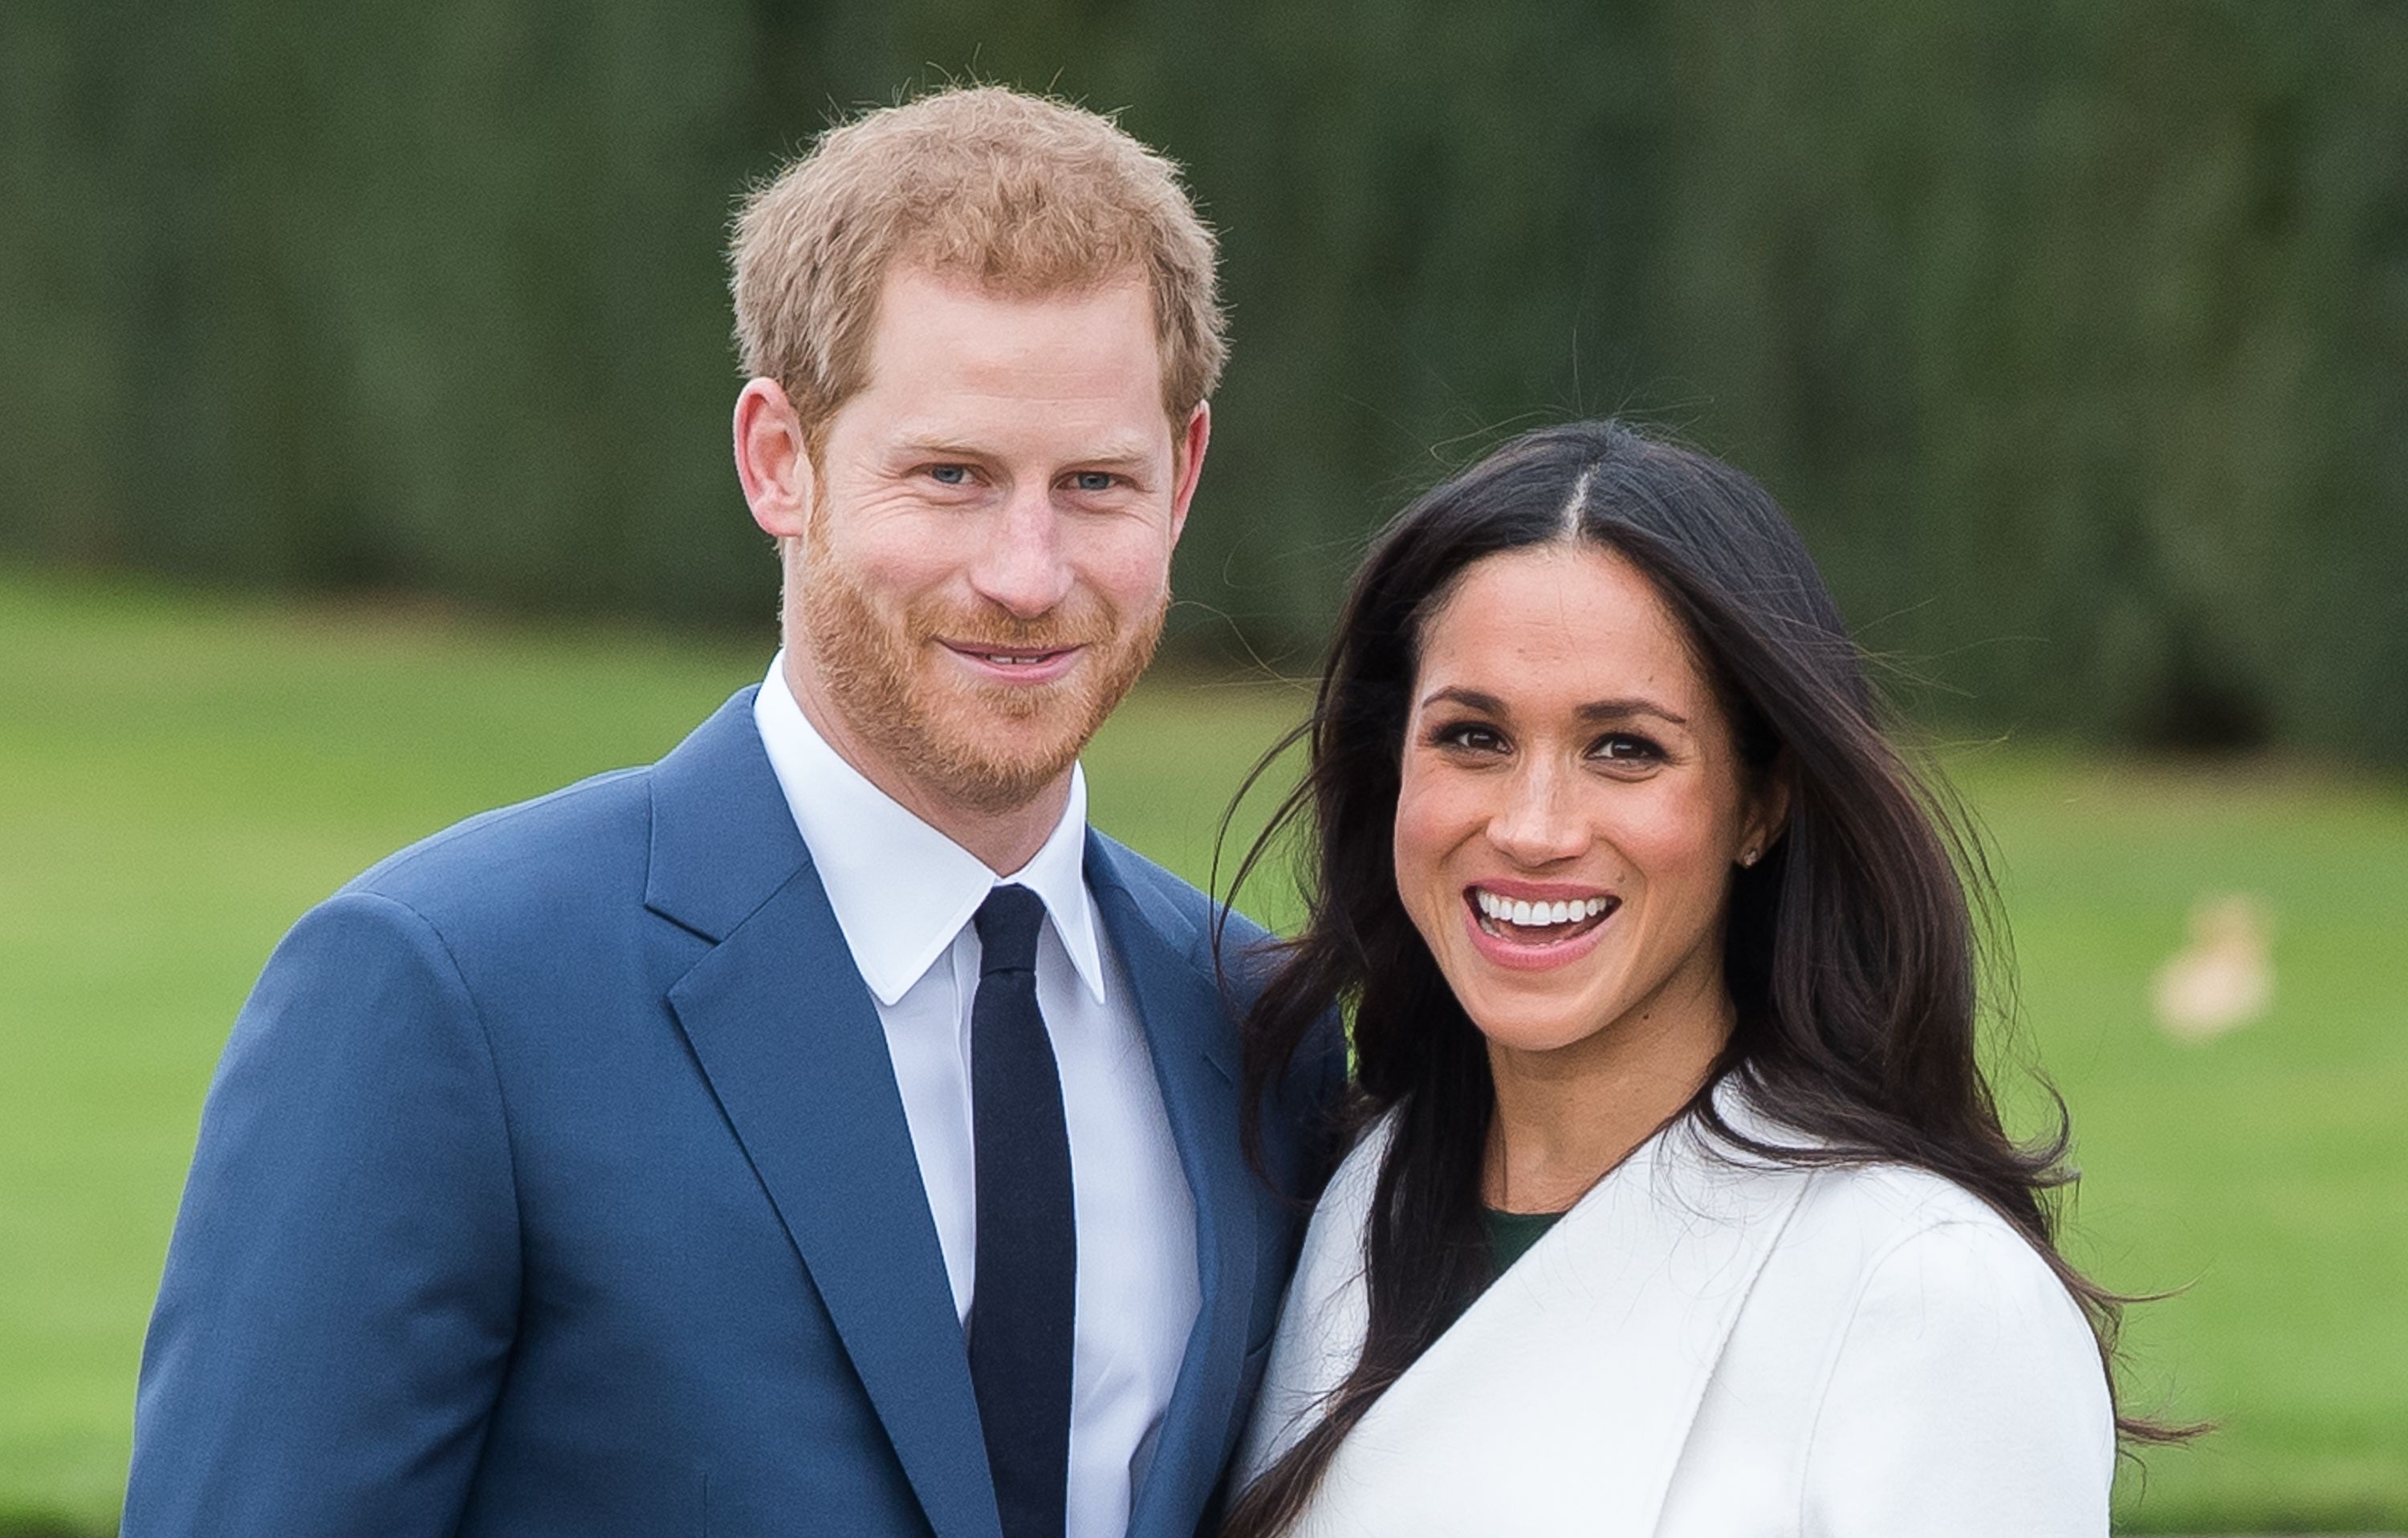 Prince Harry and Meghan Markle during an official photocall to announce their engagementat The Sunken Gardens at Kensington Palace in London, England | Photo: Getty Images